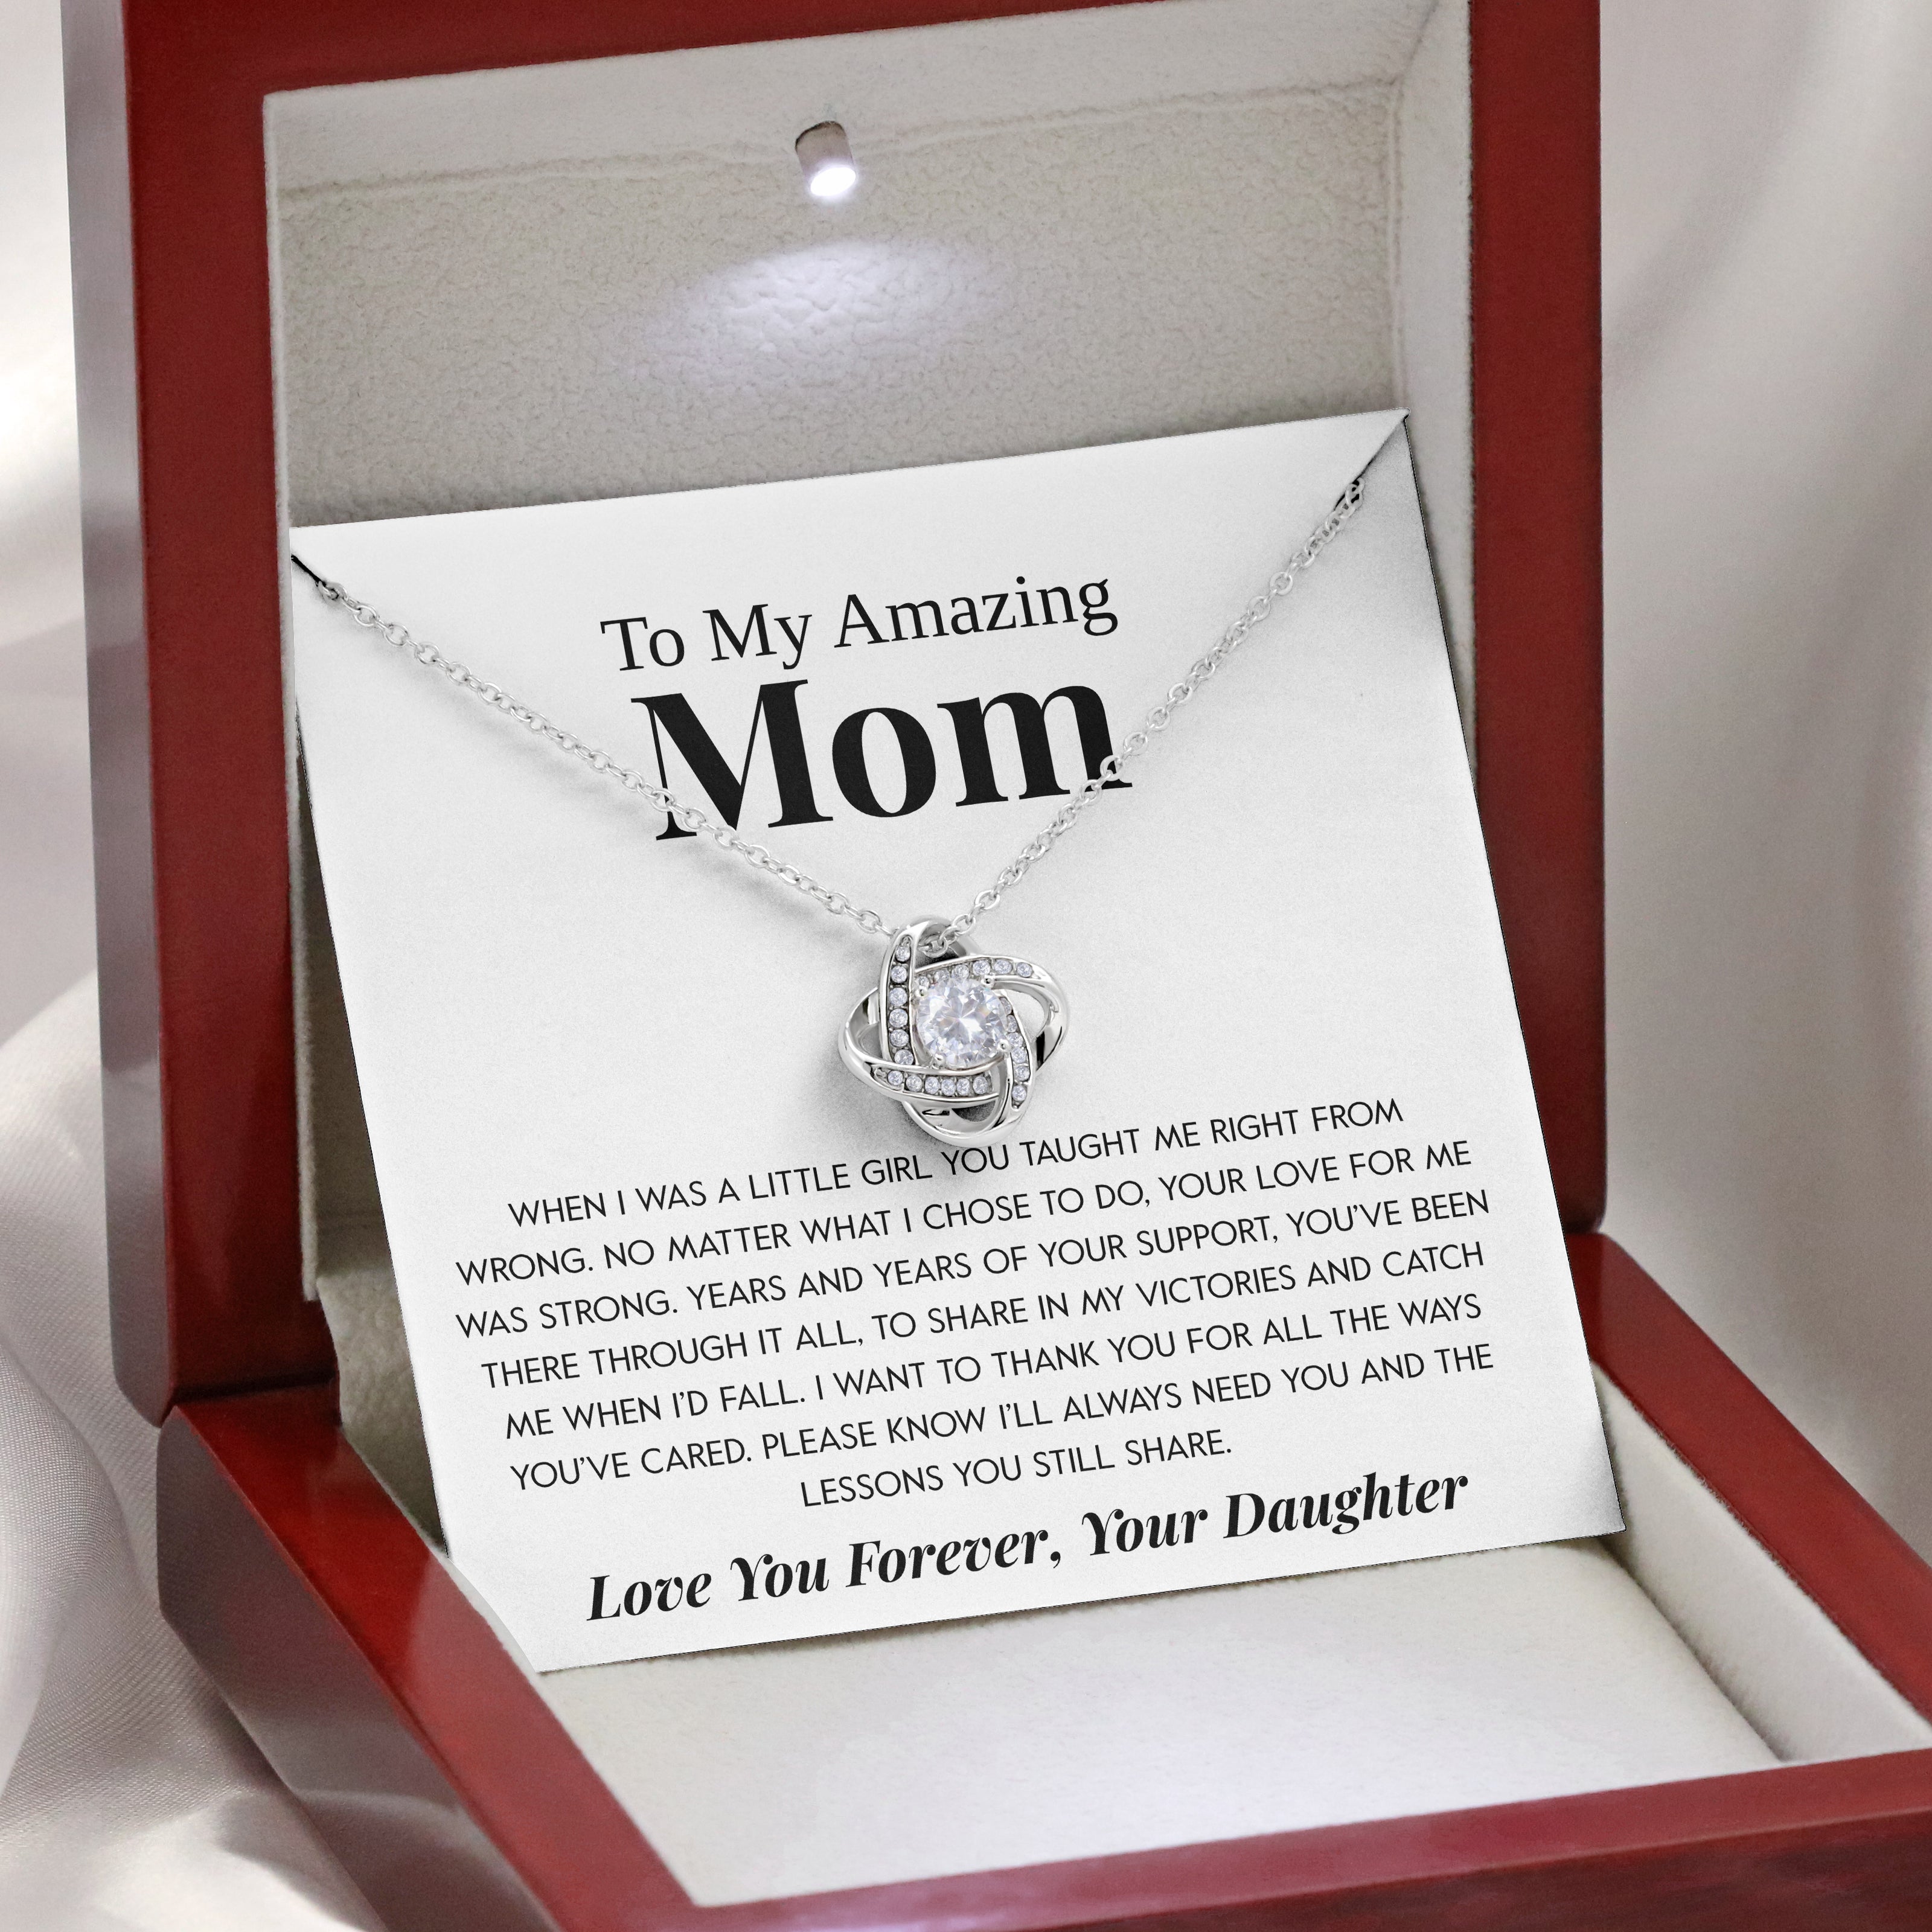 To My Amazing Mom | "Your Support" | Love Knot Necklace